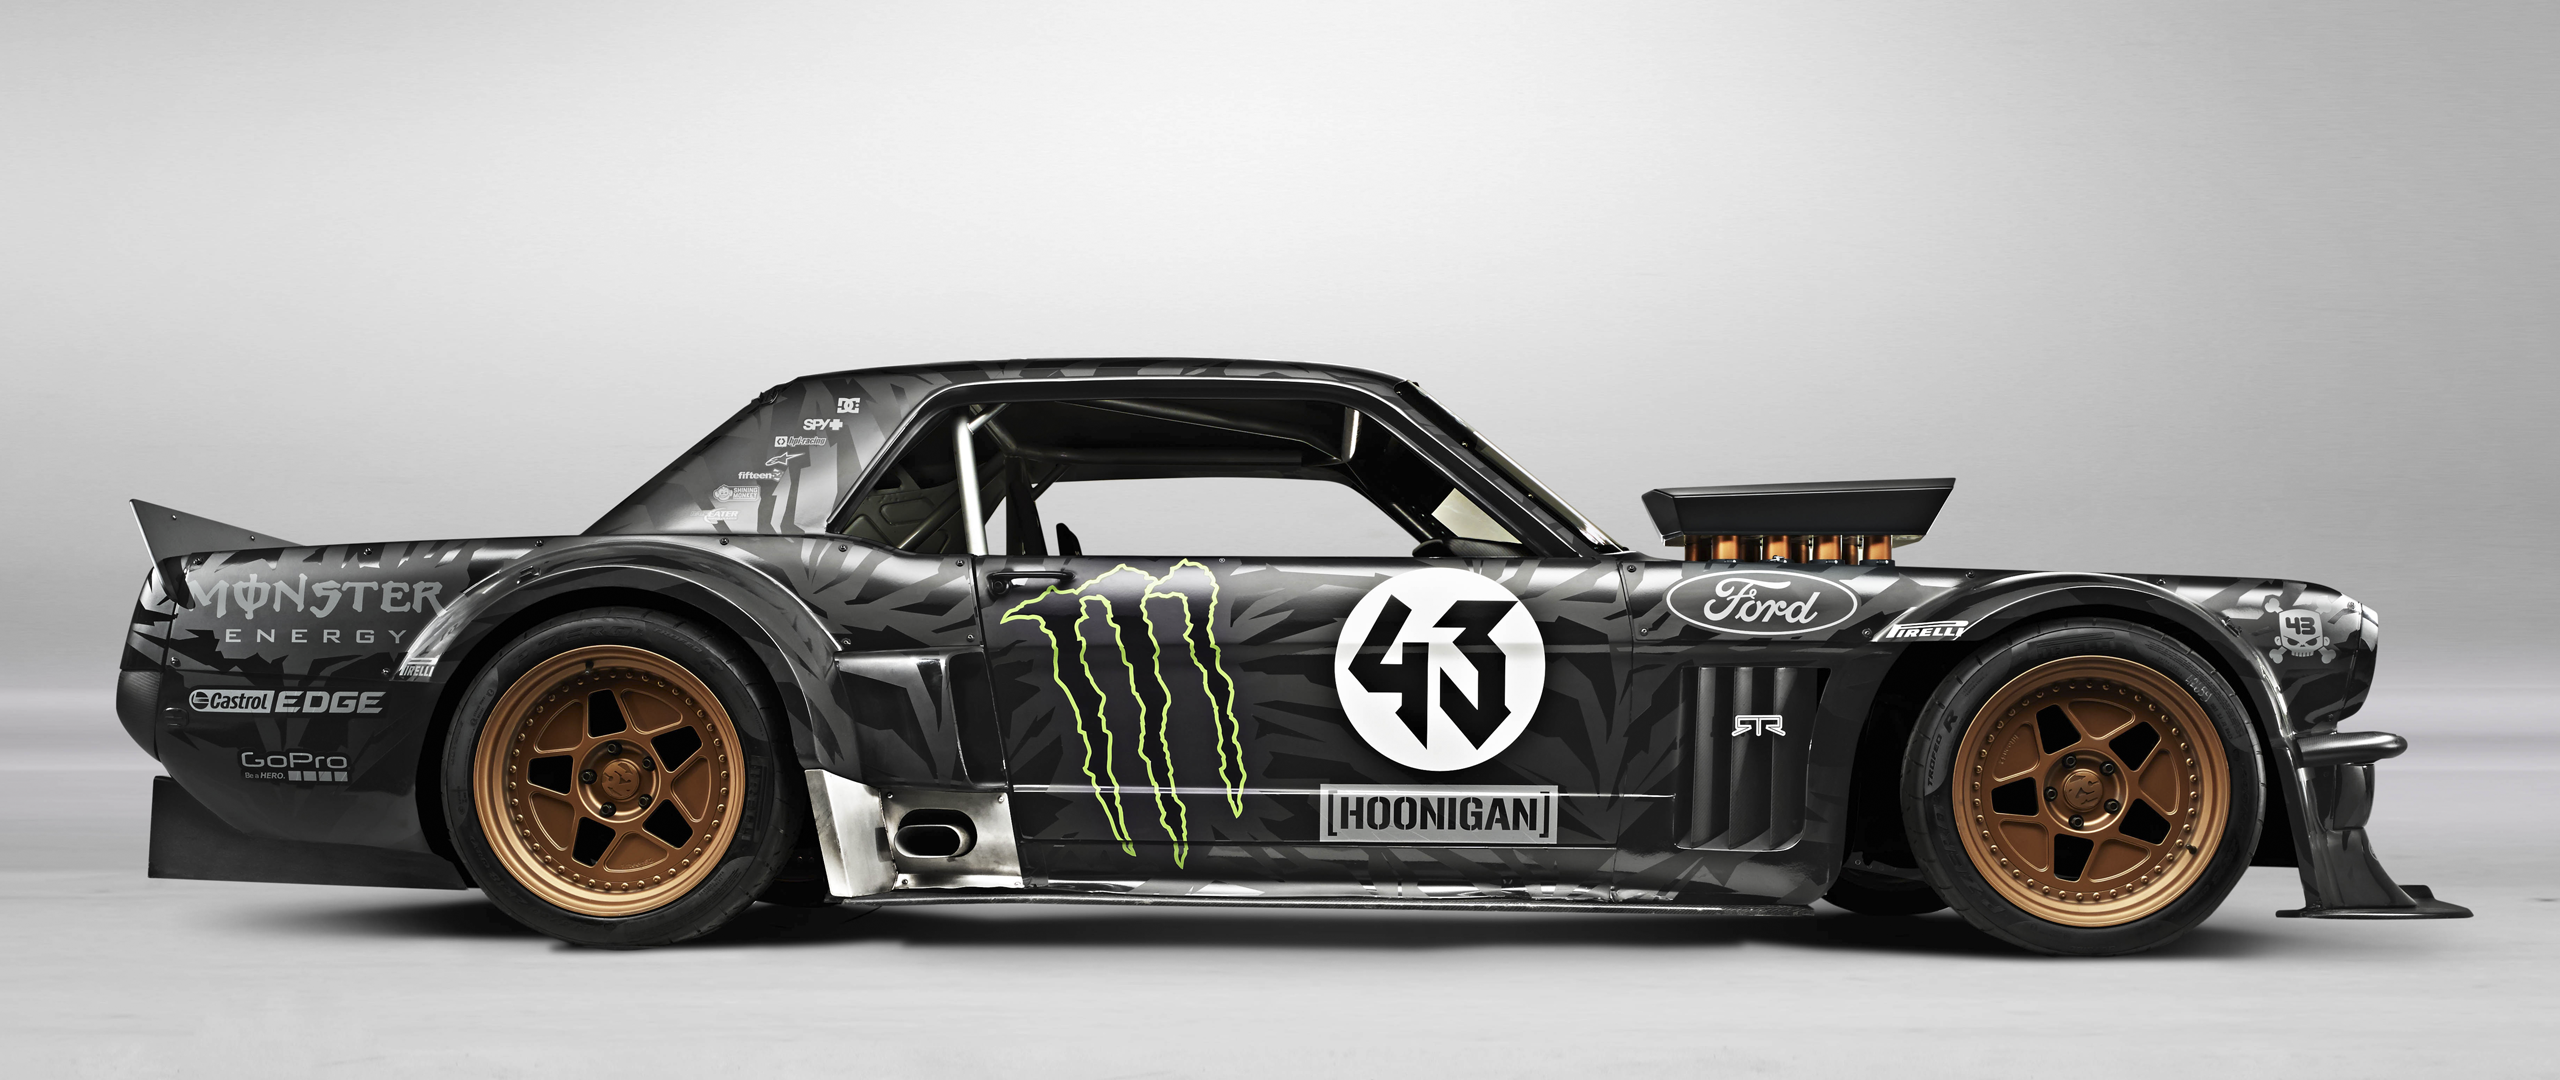 General 2560x1080 Ford Mustang drift Ken Block side view Ford black cars simple background gray background gradient vehicle livery American cars supercharger